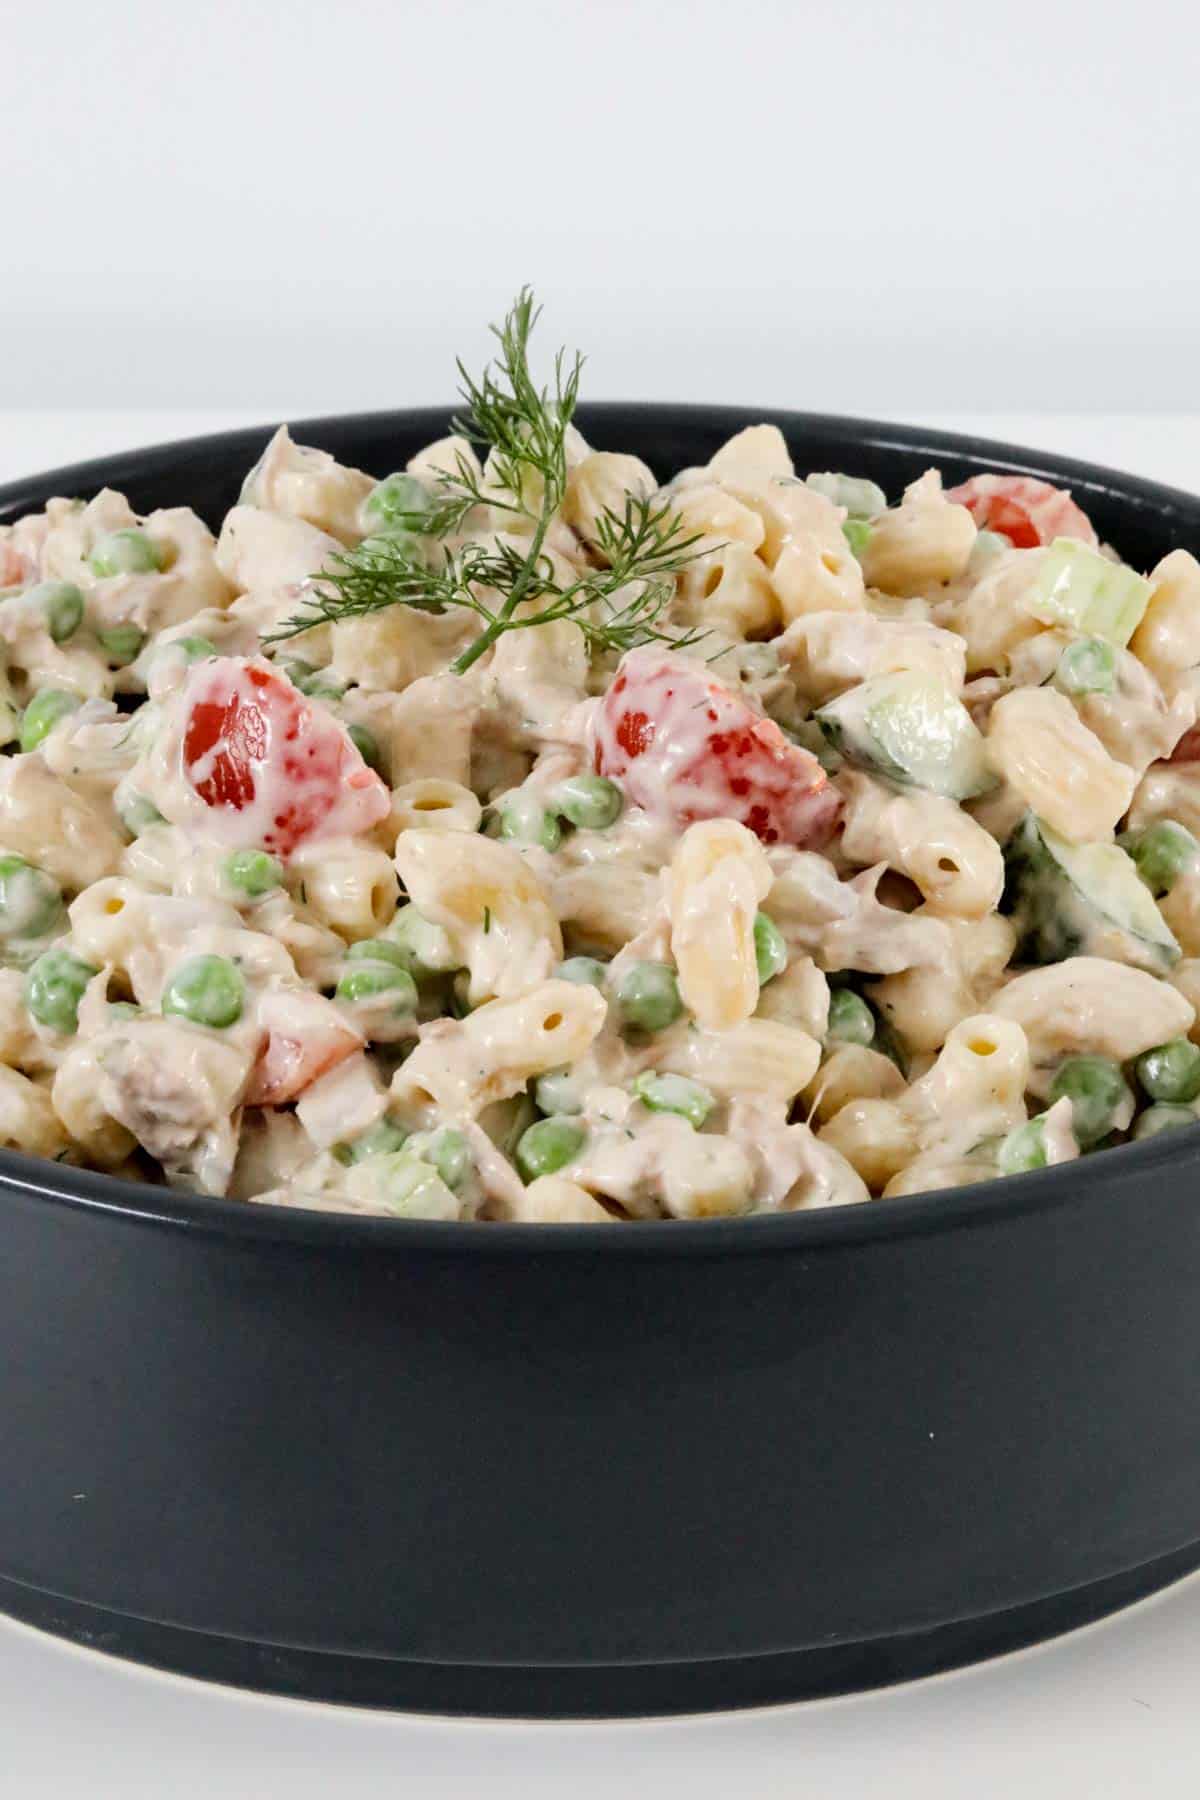 A bowl of pasta salad, garnished with fresh dill